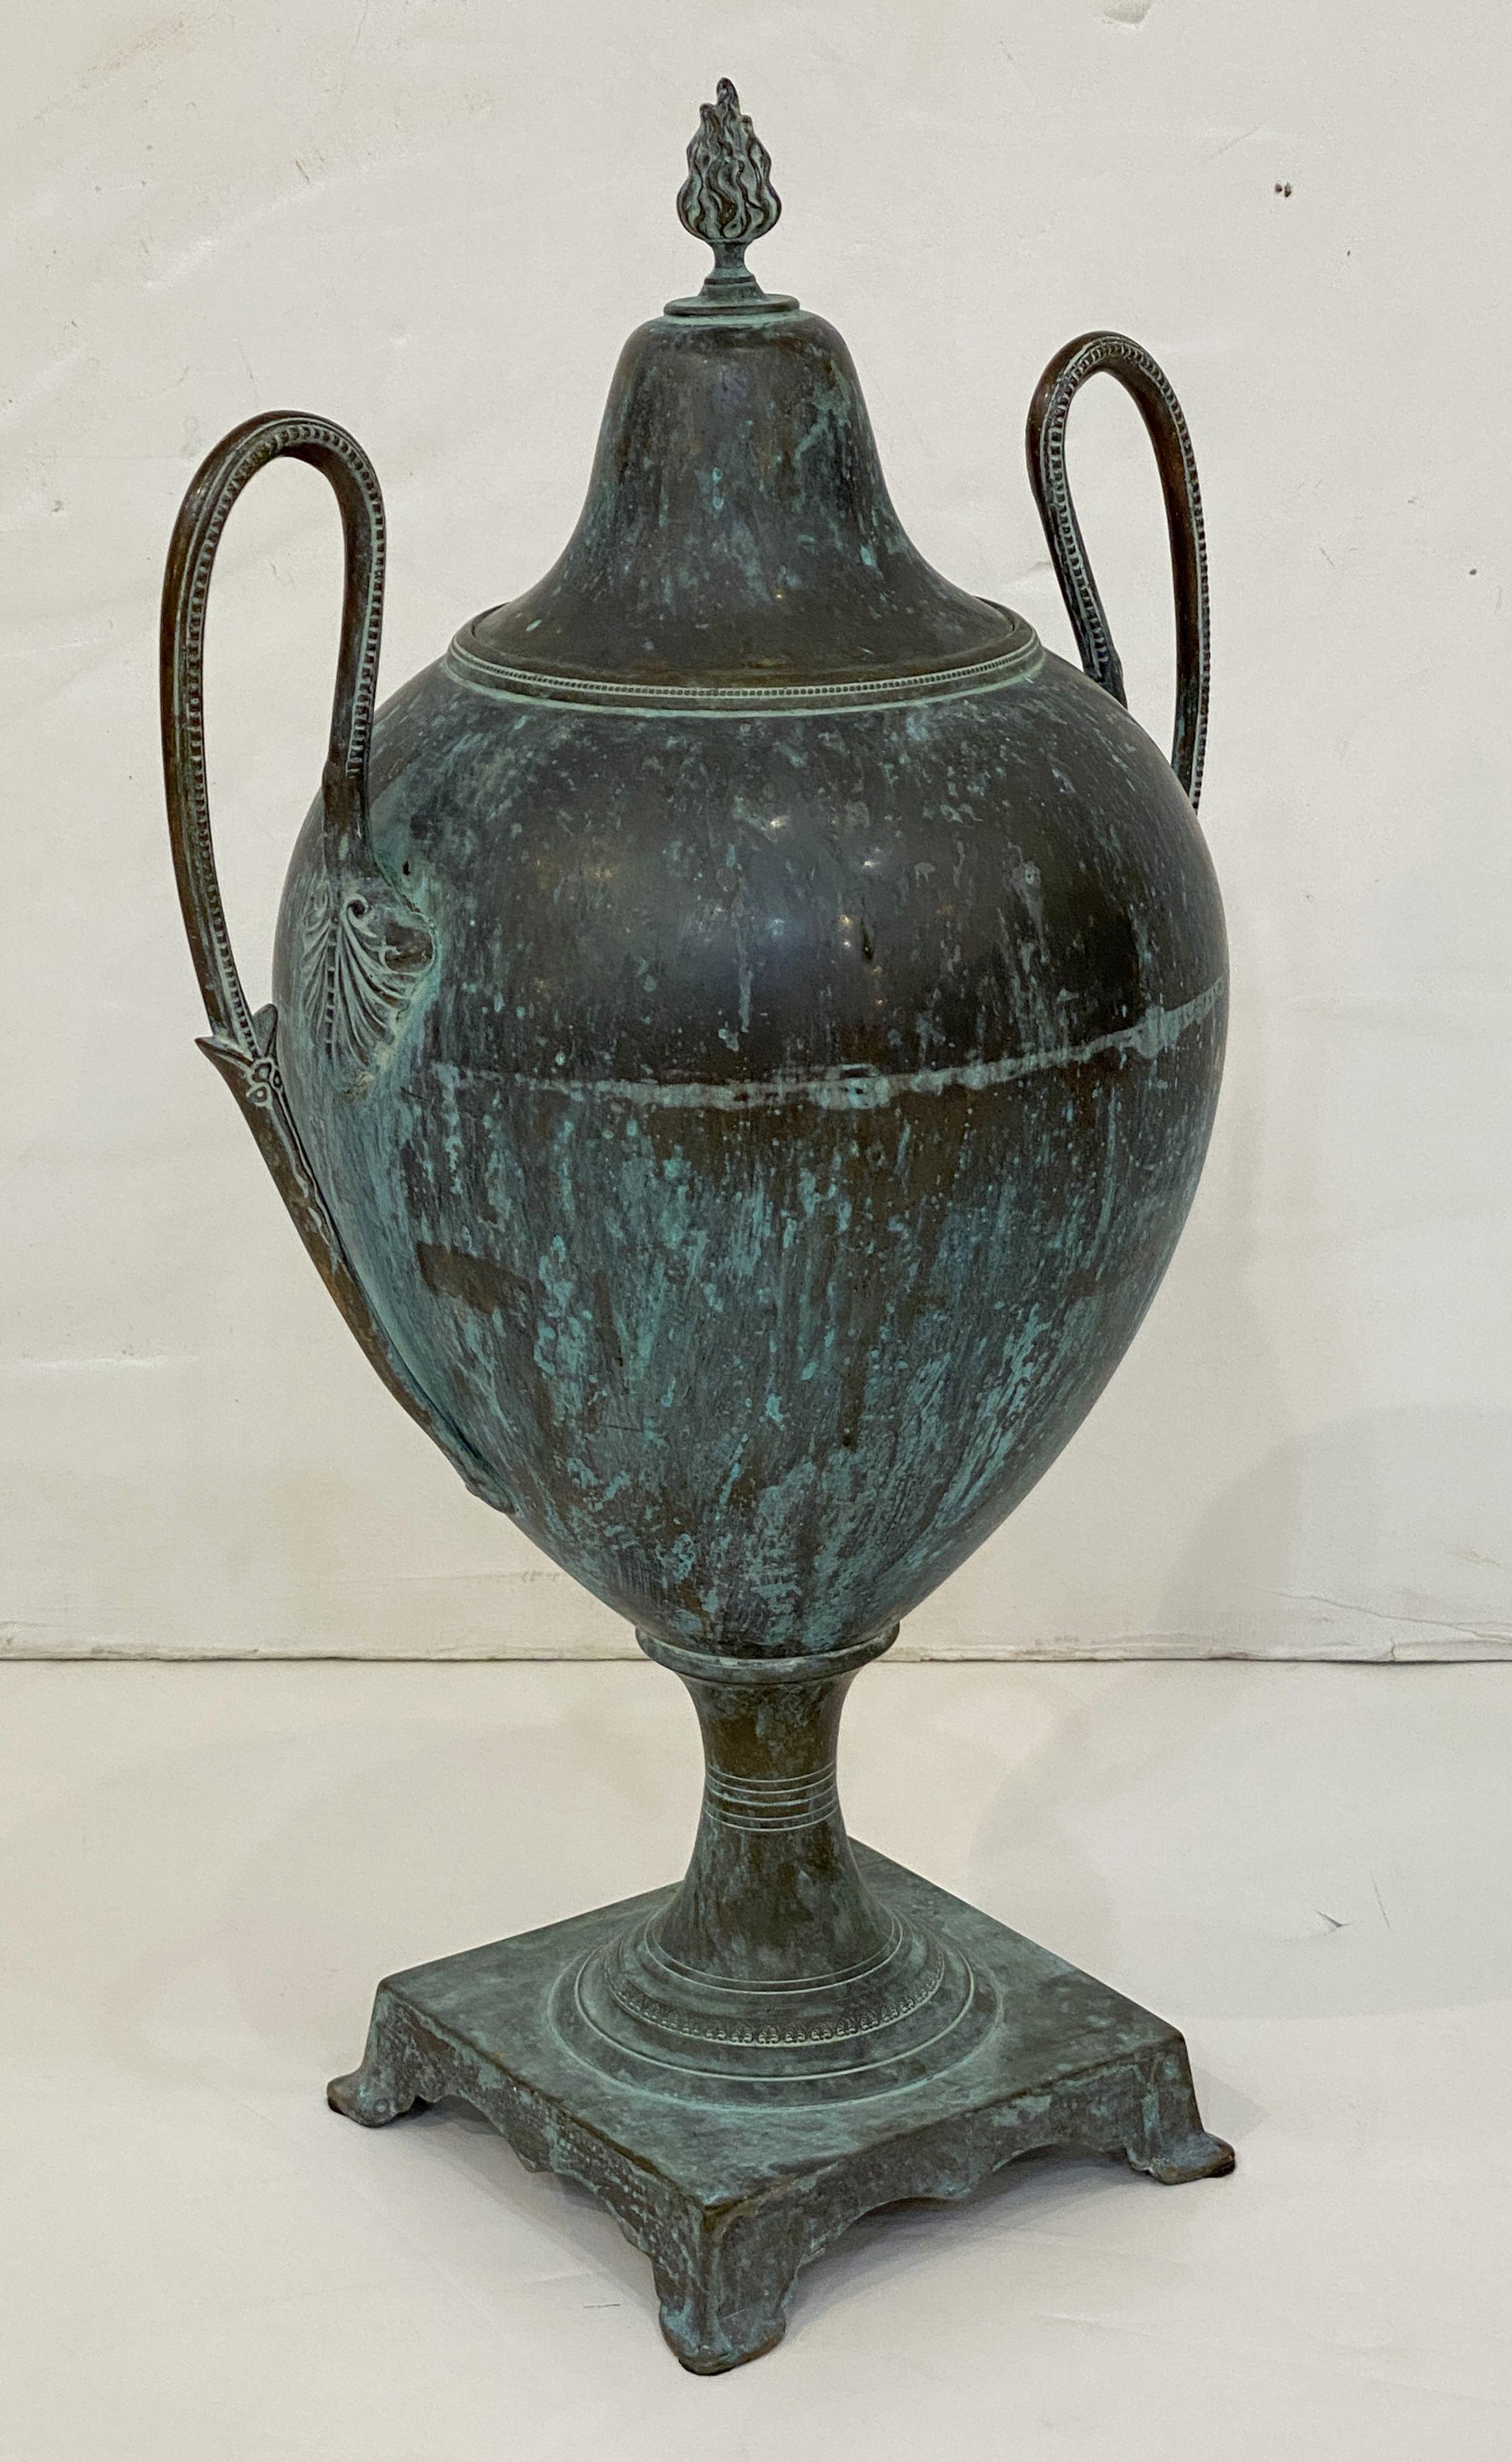 Classical Greek French Verdigris Copper Urn or Vase with Lid in the Classical Style